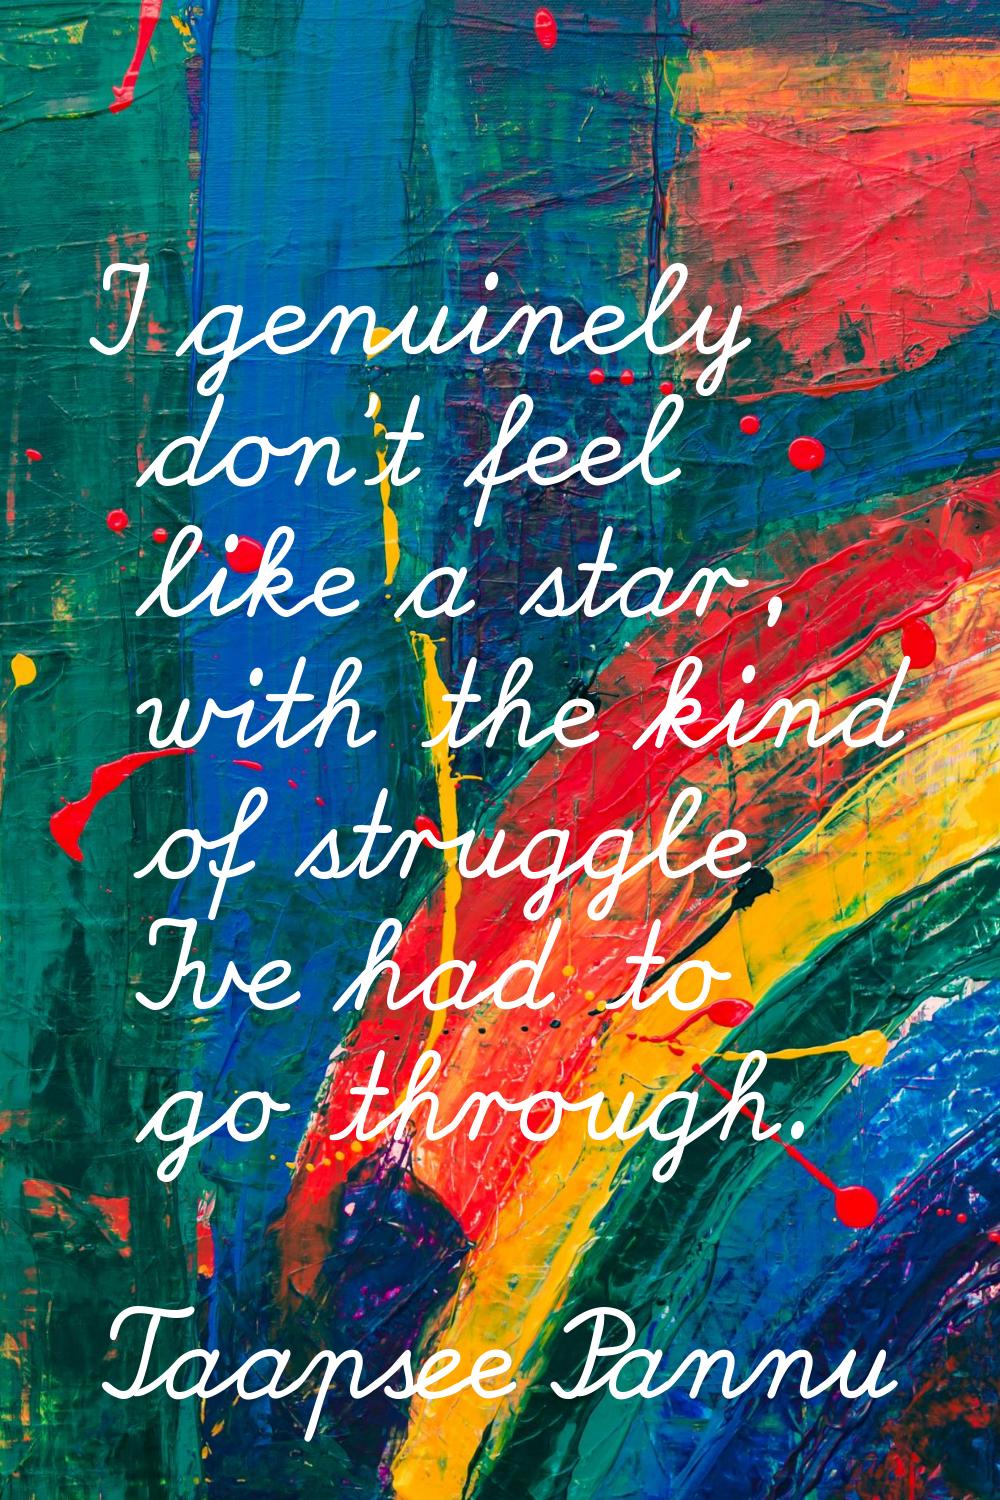 I genuinely don't feel like a star, with the kind of struggle I've had to go through.